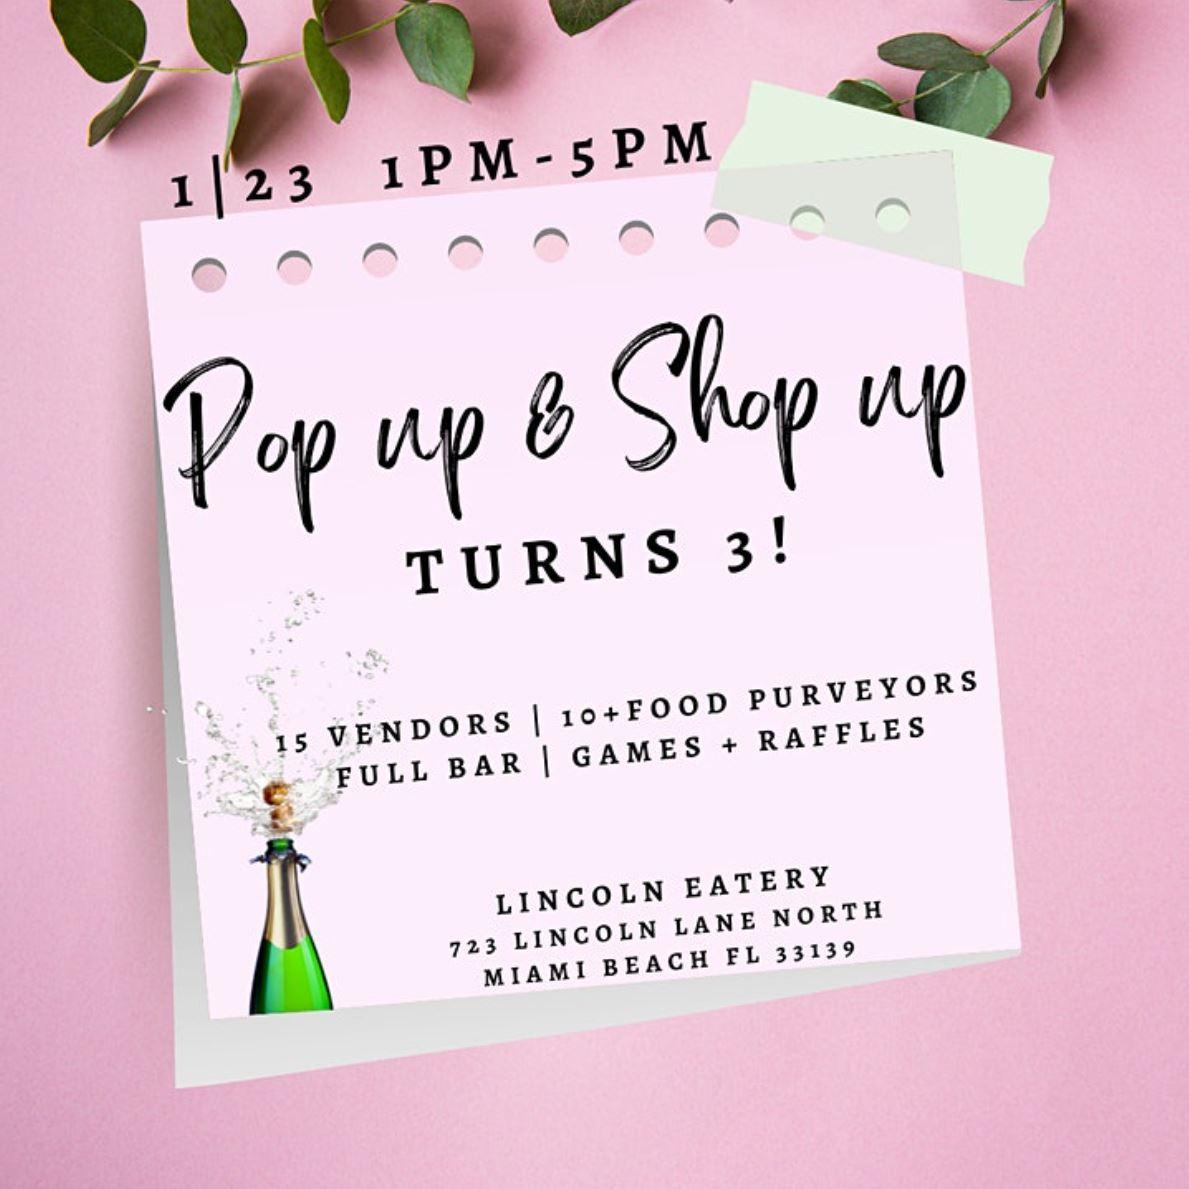 Pop up & Shop up’s 3rd year Anniversary Celebration at The Lincoln Eatery